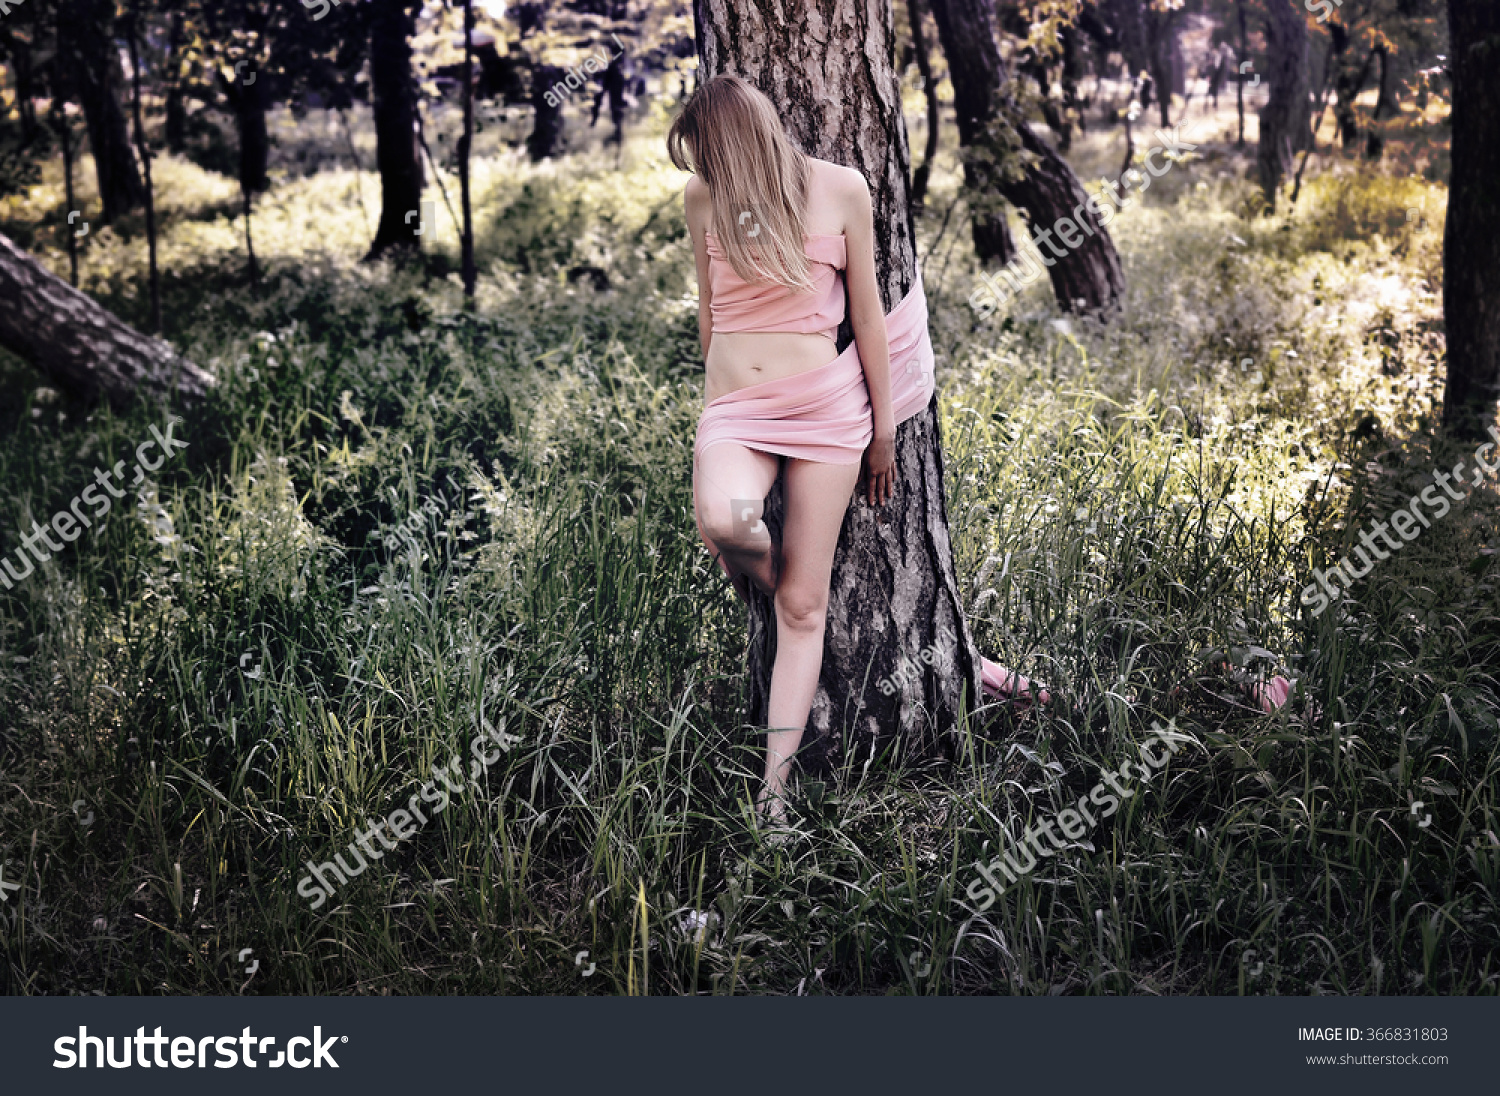 Teen Forest Nude Female 40